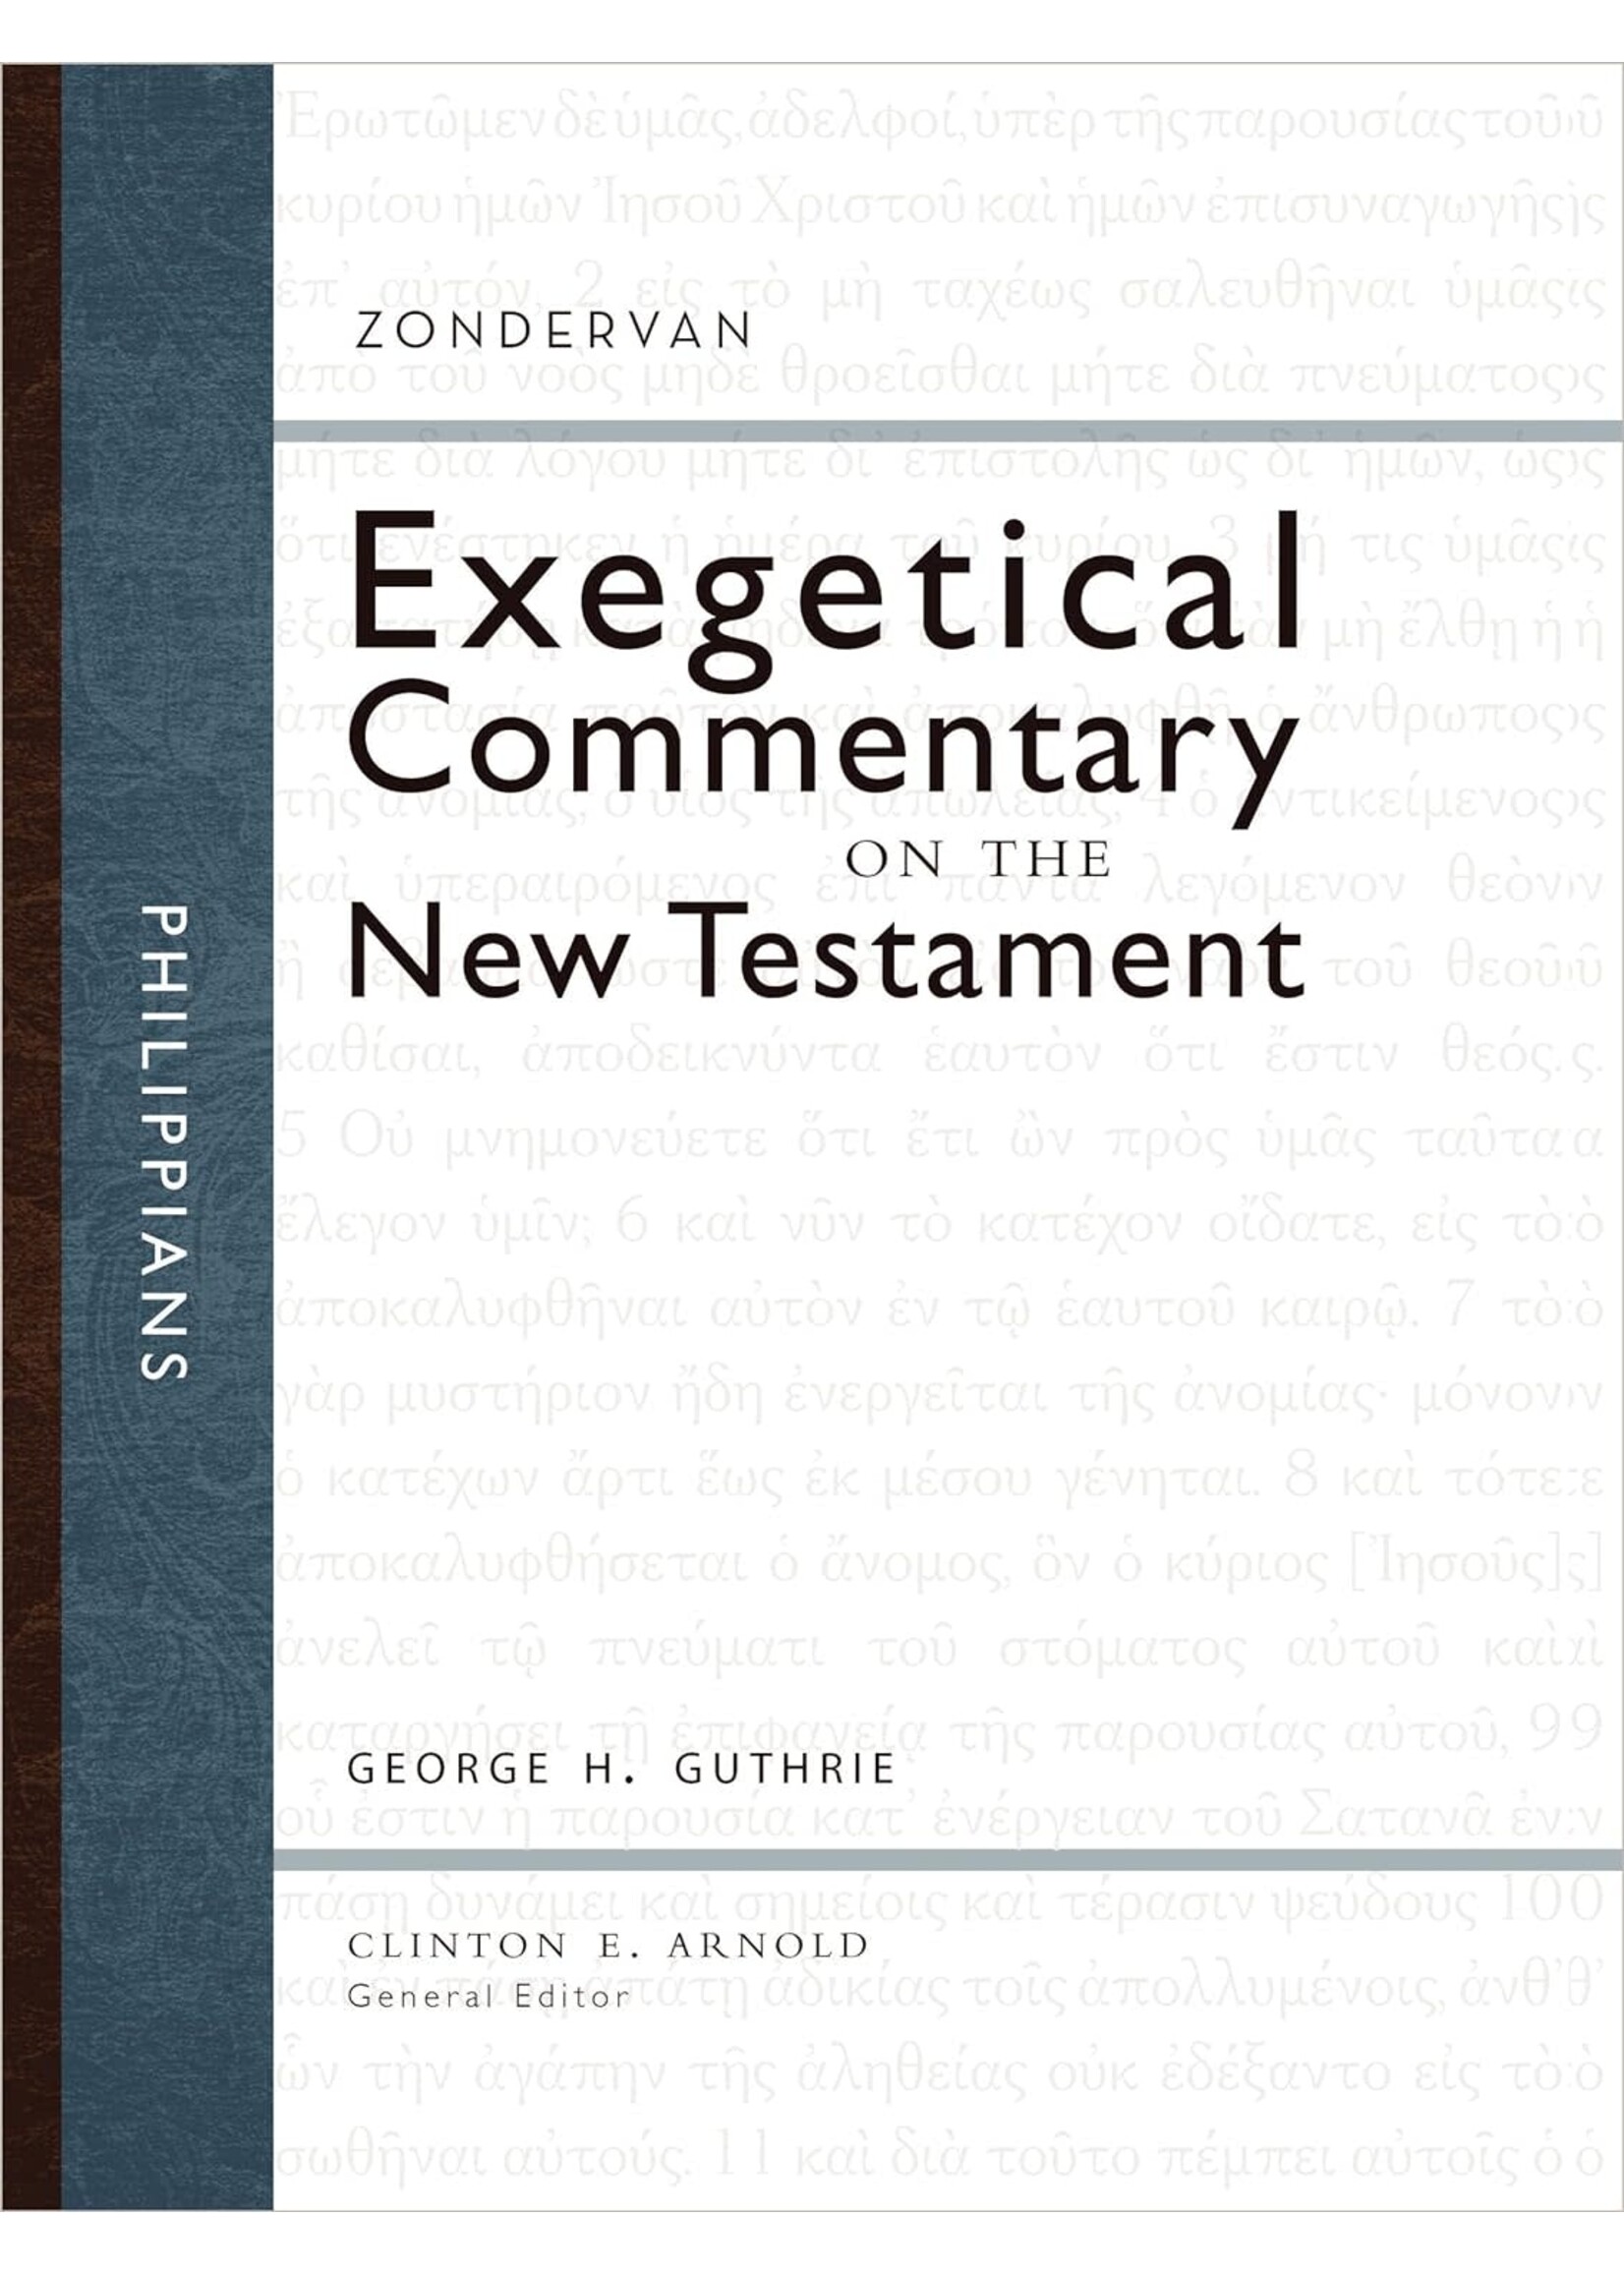 Nahum (Zondervan Exegetical Commentary On The Old Testament)